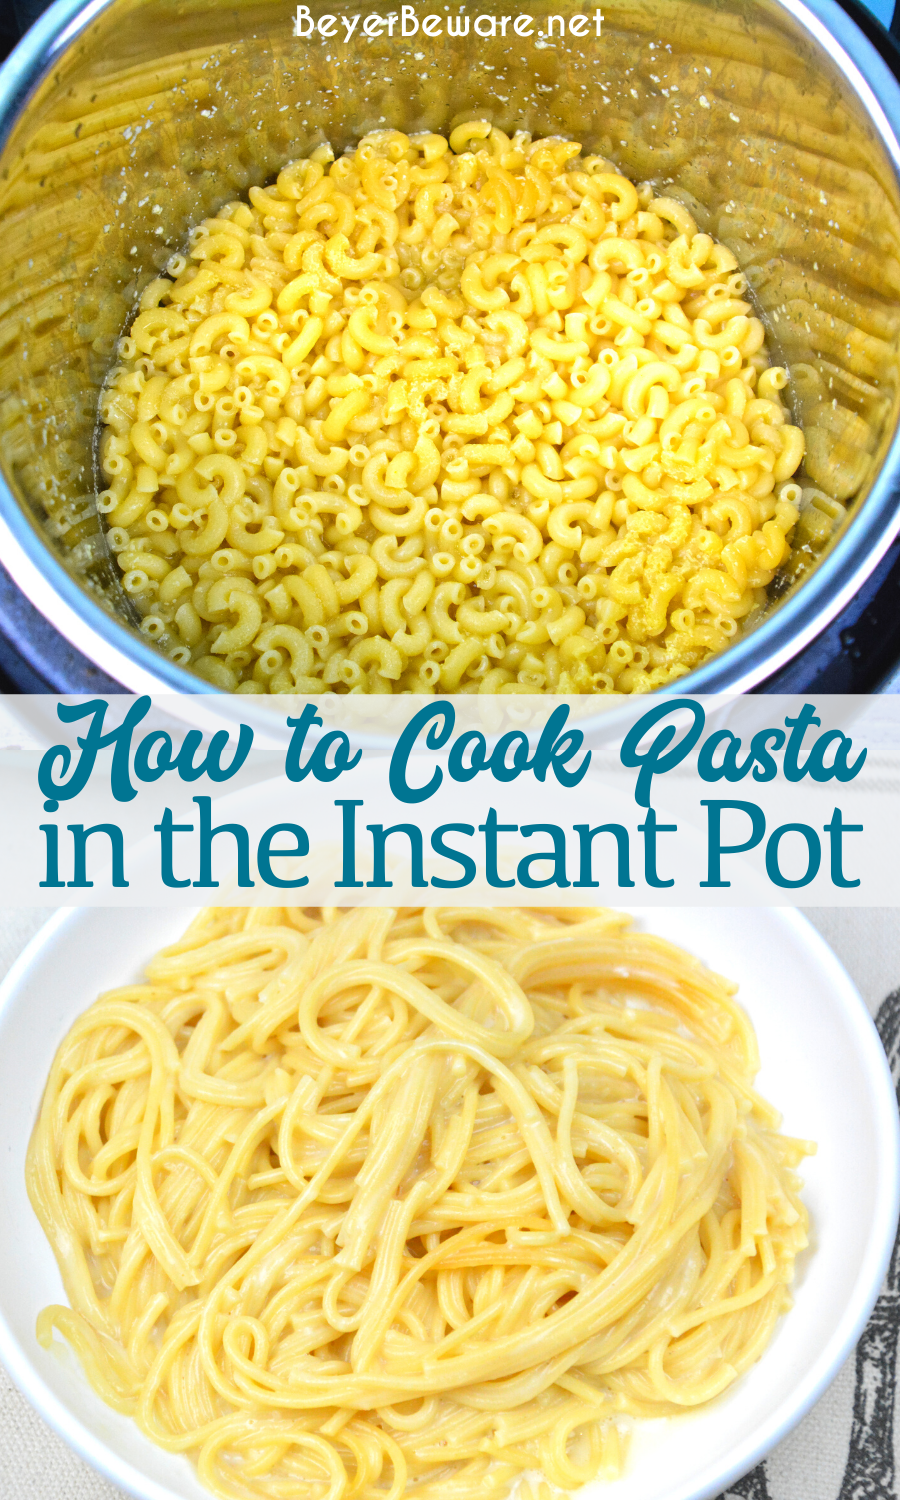 How to make pasta in the Instant Pot is so simple you will want to save these directions and make your fully cooked pasta in under 10 minutes from start to finish.